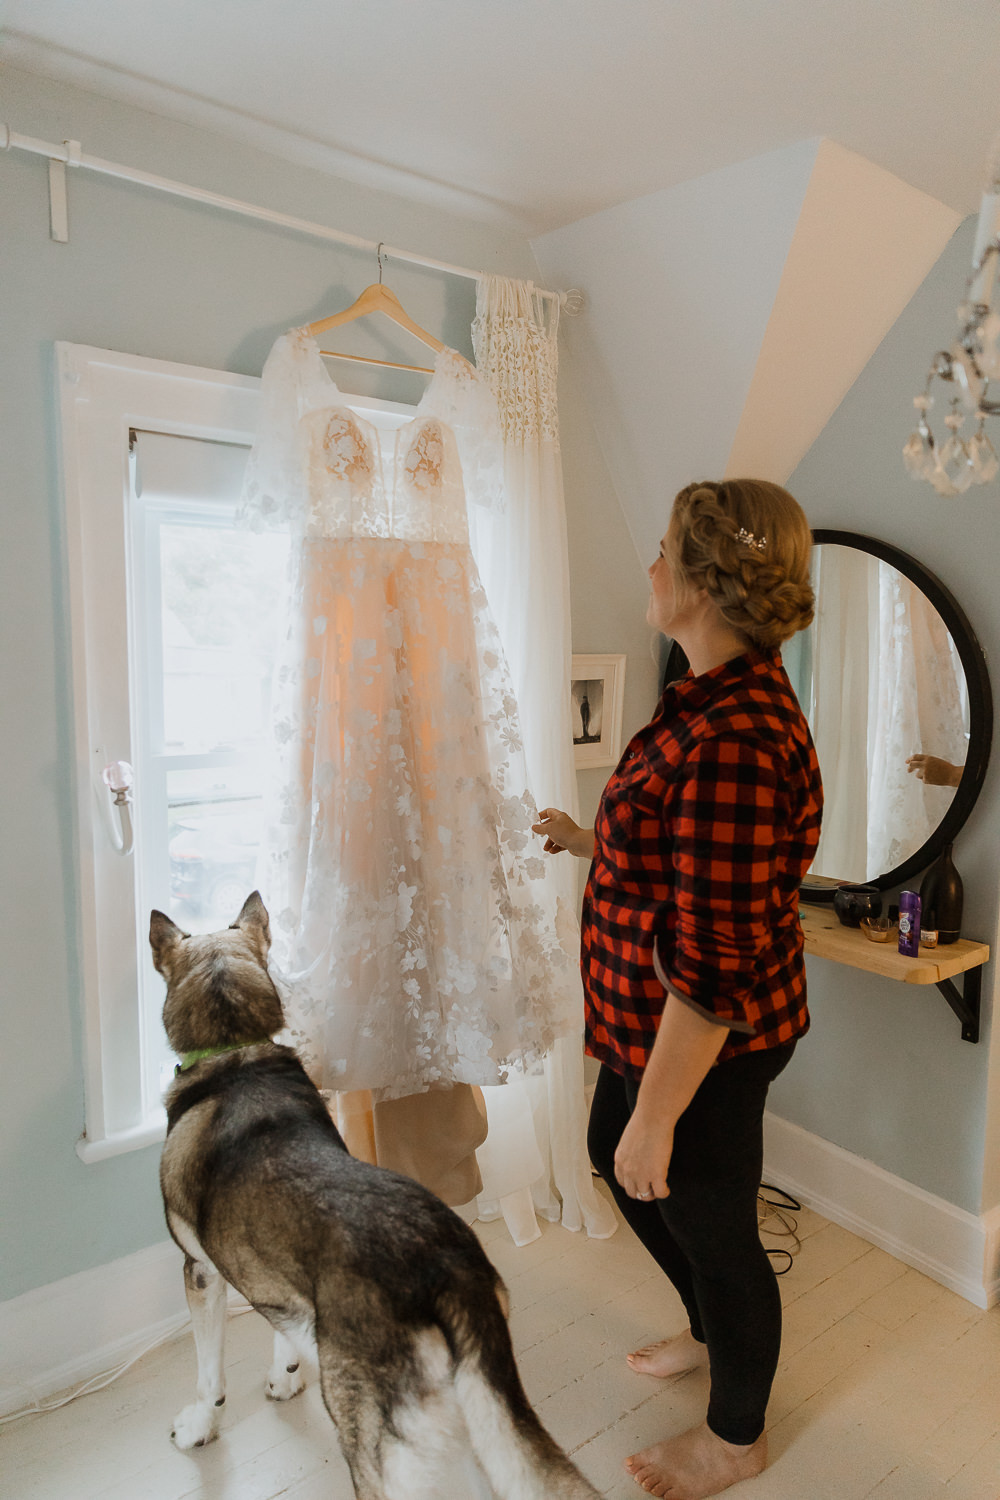 Bride getting ready with dog looking out window Rainy-fall-wedding-at-The-Knox-Merickville-by- Sonia V Photo - Documentary Style Candid Photographer - Ottawa Ontario Kemptville Destination Photographer - Authentic Colour Photography - Wedding Photographer - Branding Photographer - Small Business Headshots - Engagement Photos - Family Portraits - Lifestyle